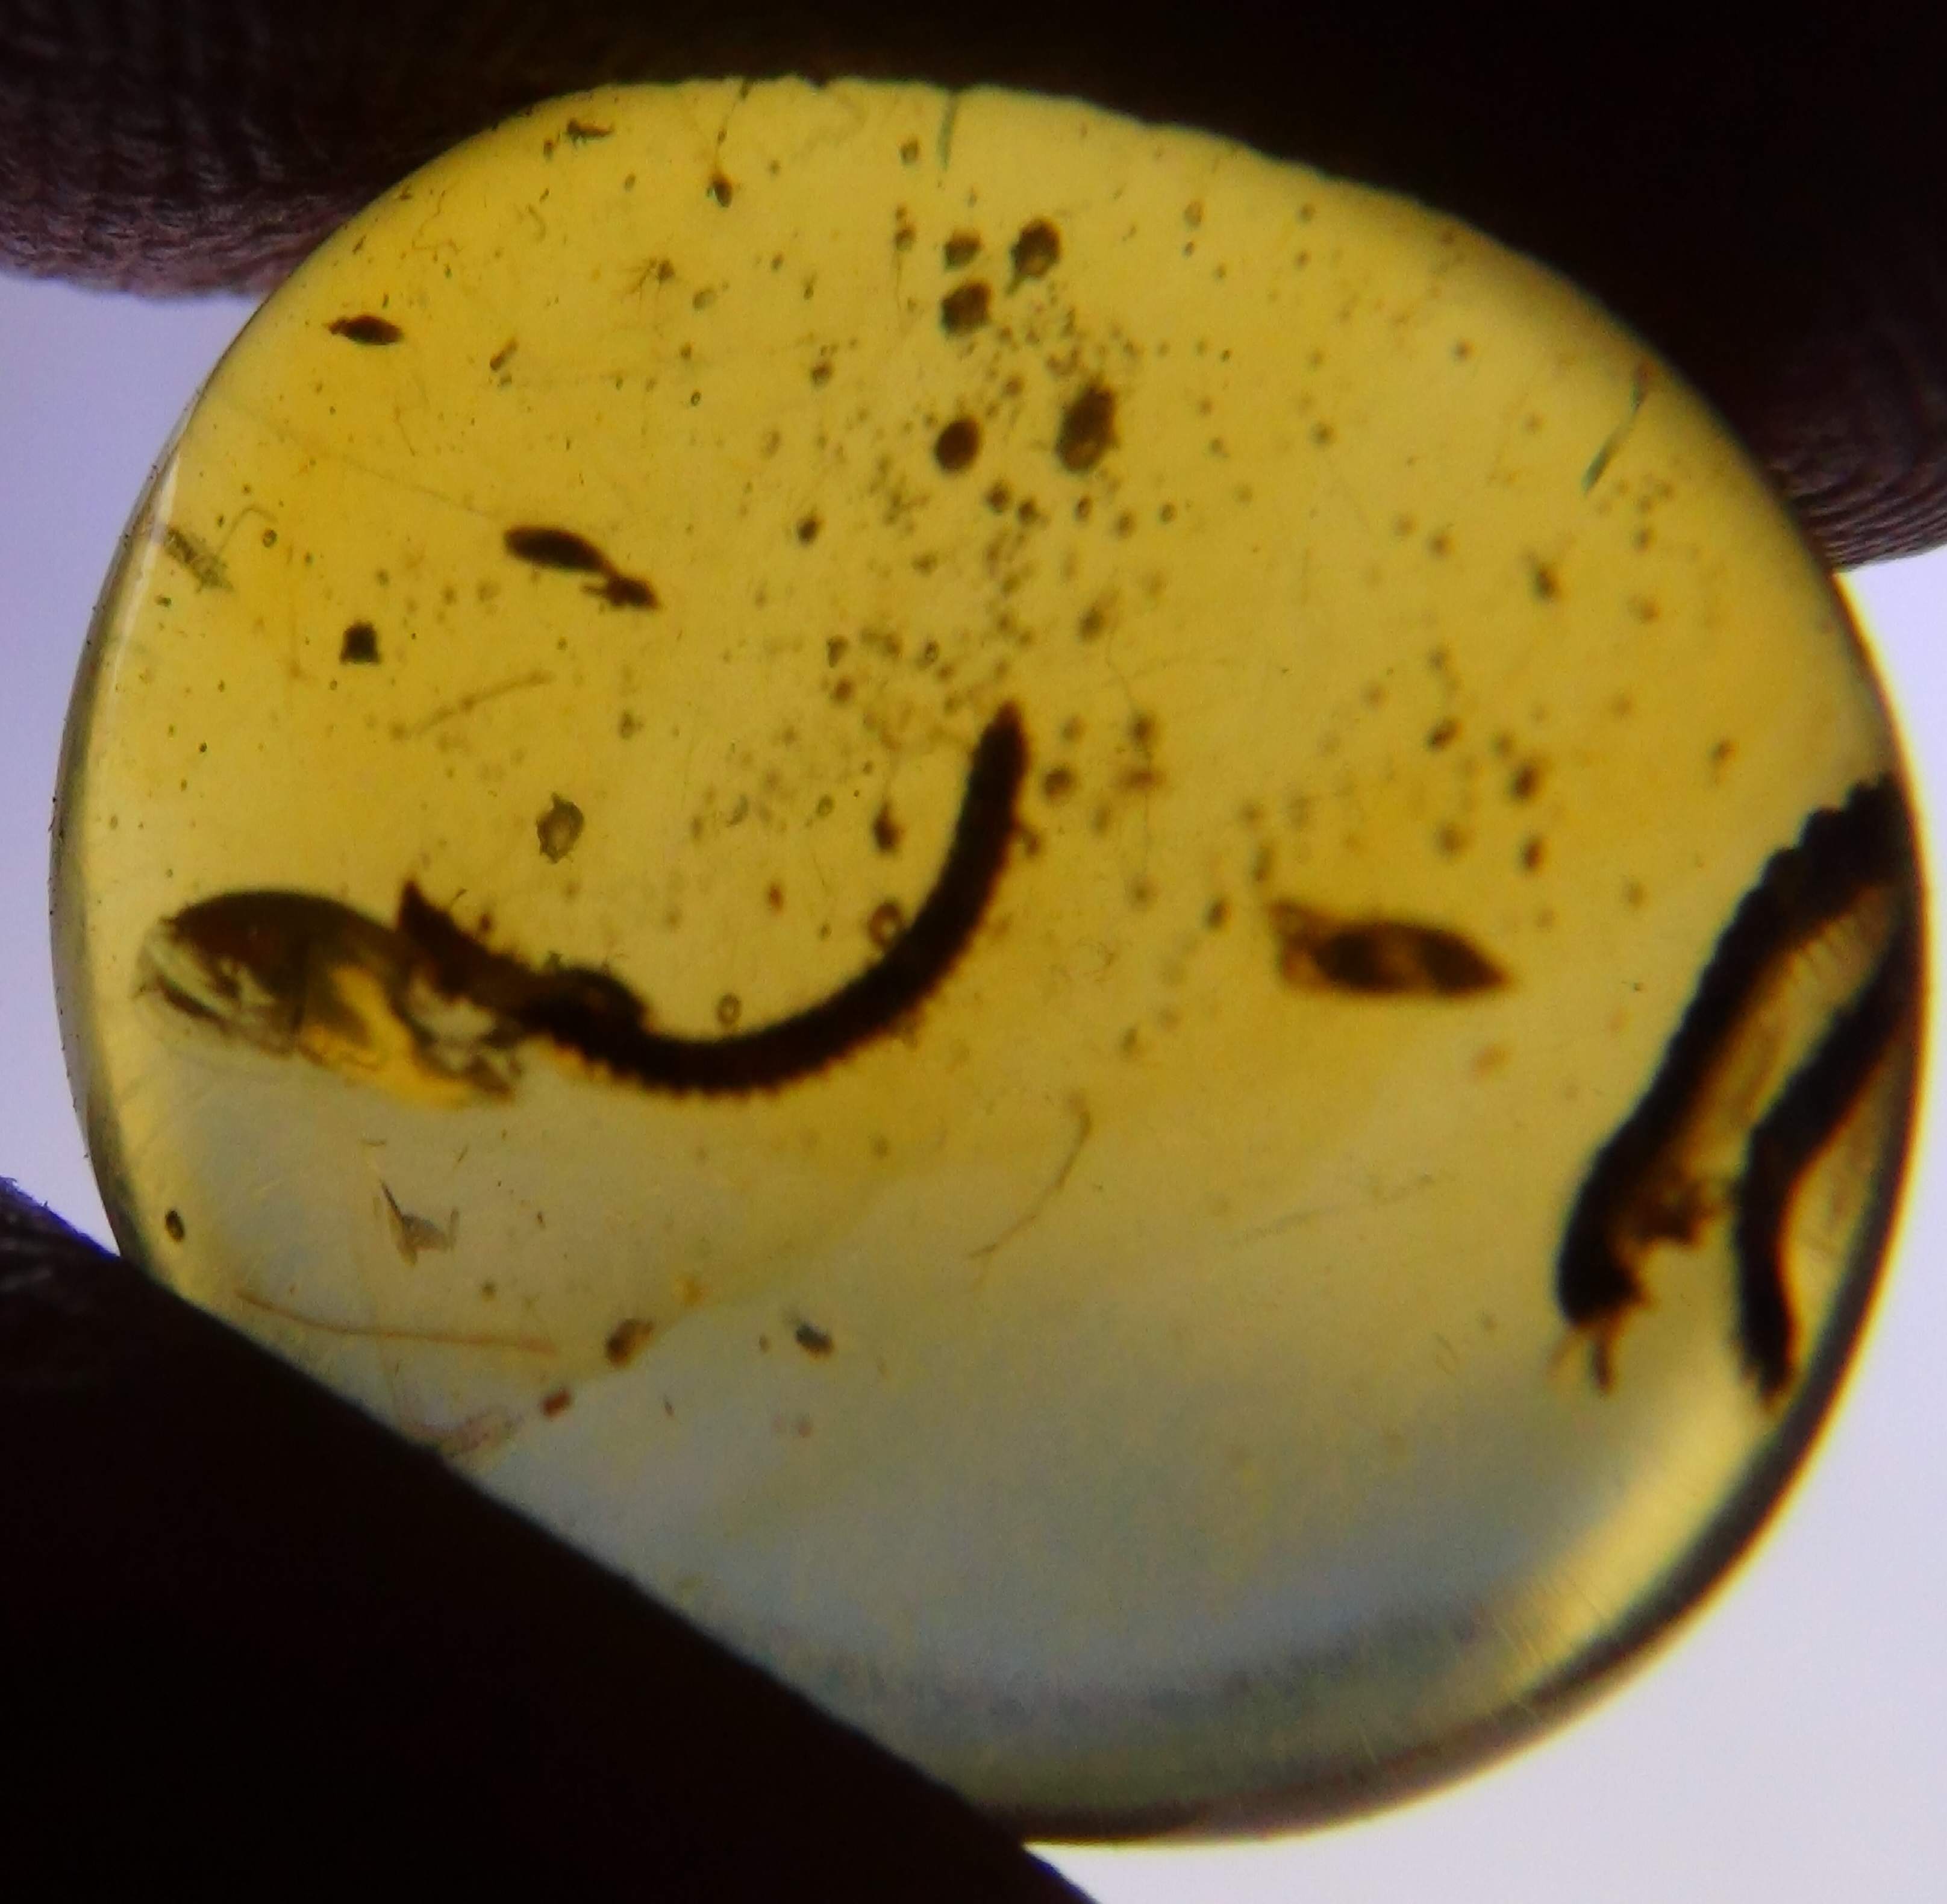 Millipedes in amber